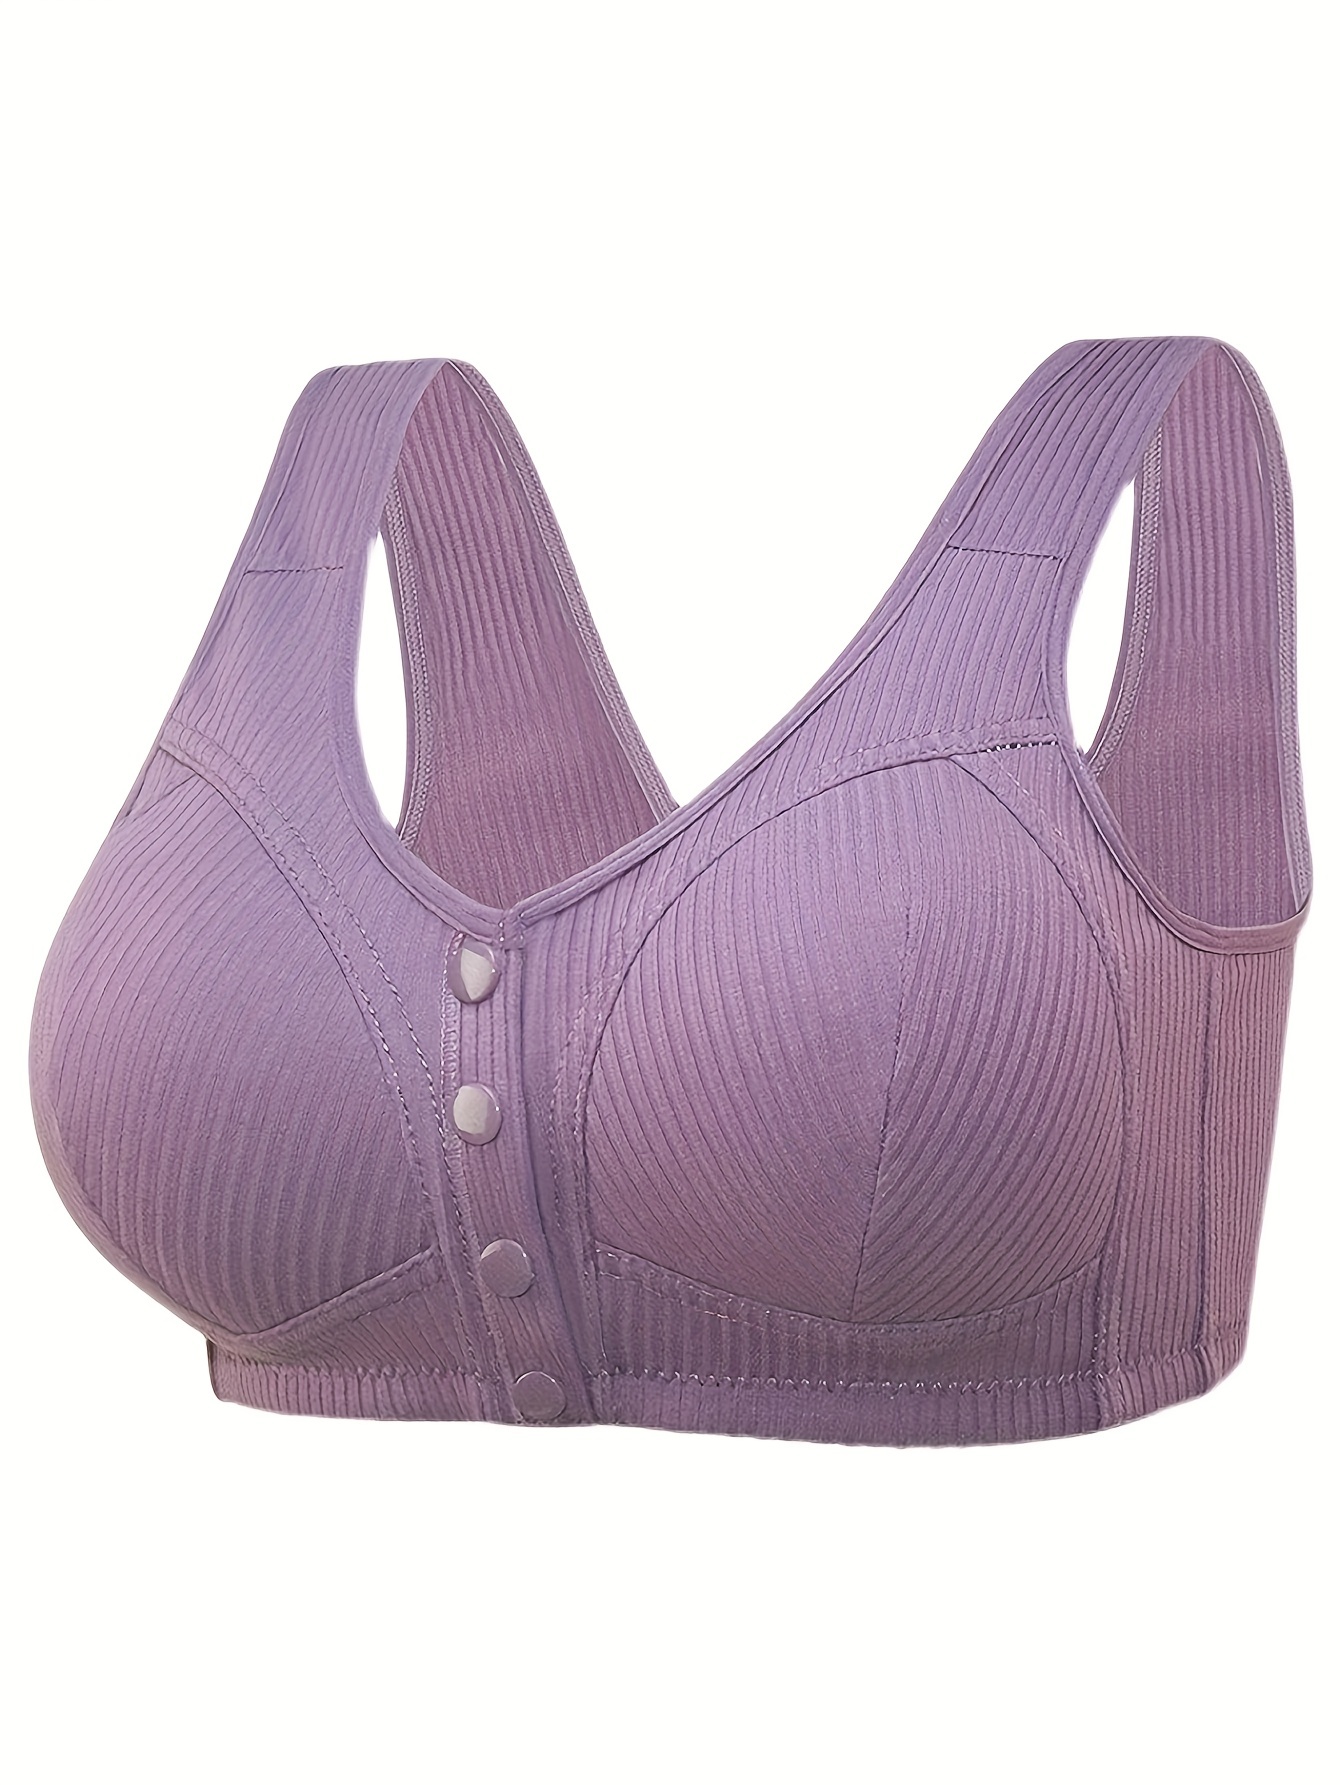 Buy Plus Size Snap Front Bra for Women Comfort Breathable Skin